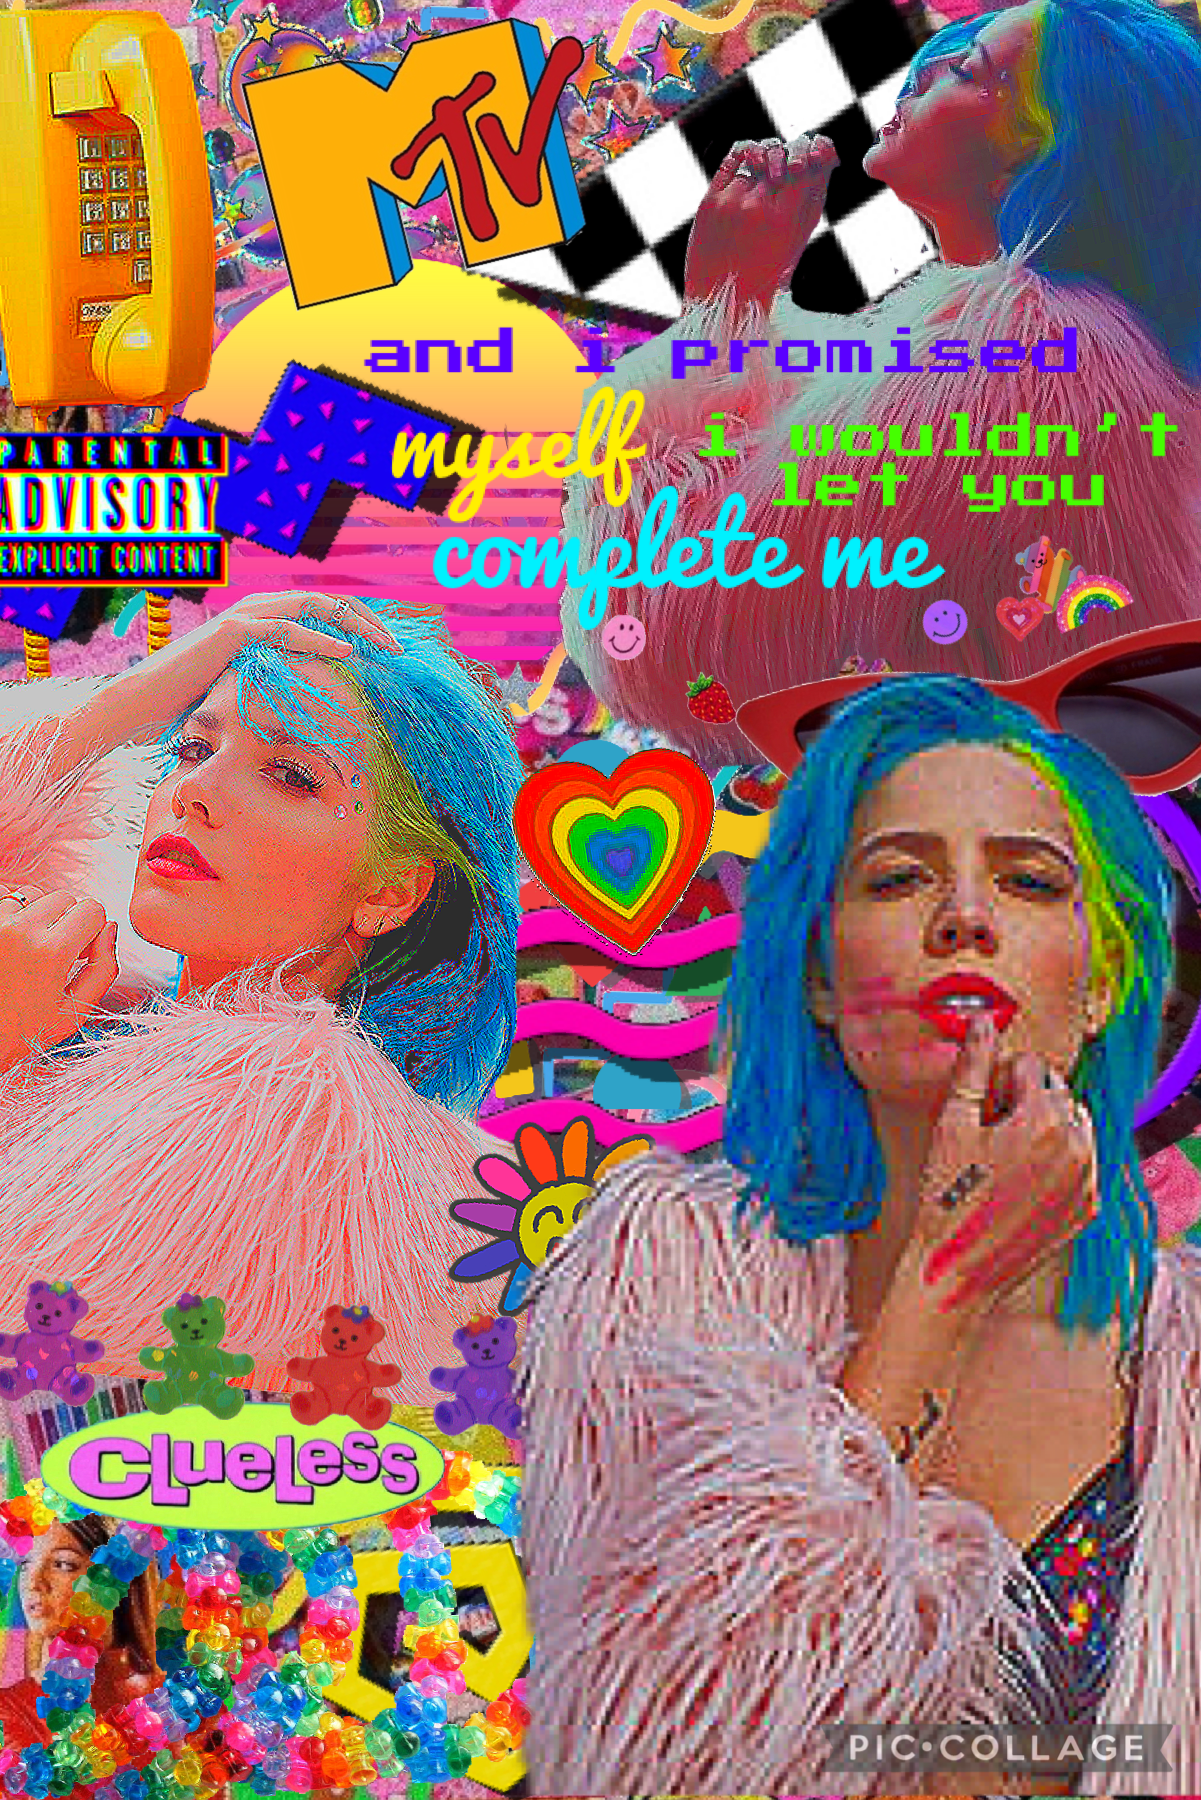 🌈tap!🌈 
well this is ✨chaotic✨ i tried like a 90s/80s vibe... not sure i love it 🤔 also @metanoia do you like this song? it’s an older halsey one ☺️